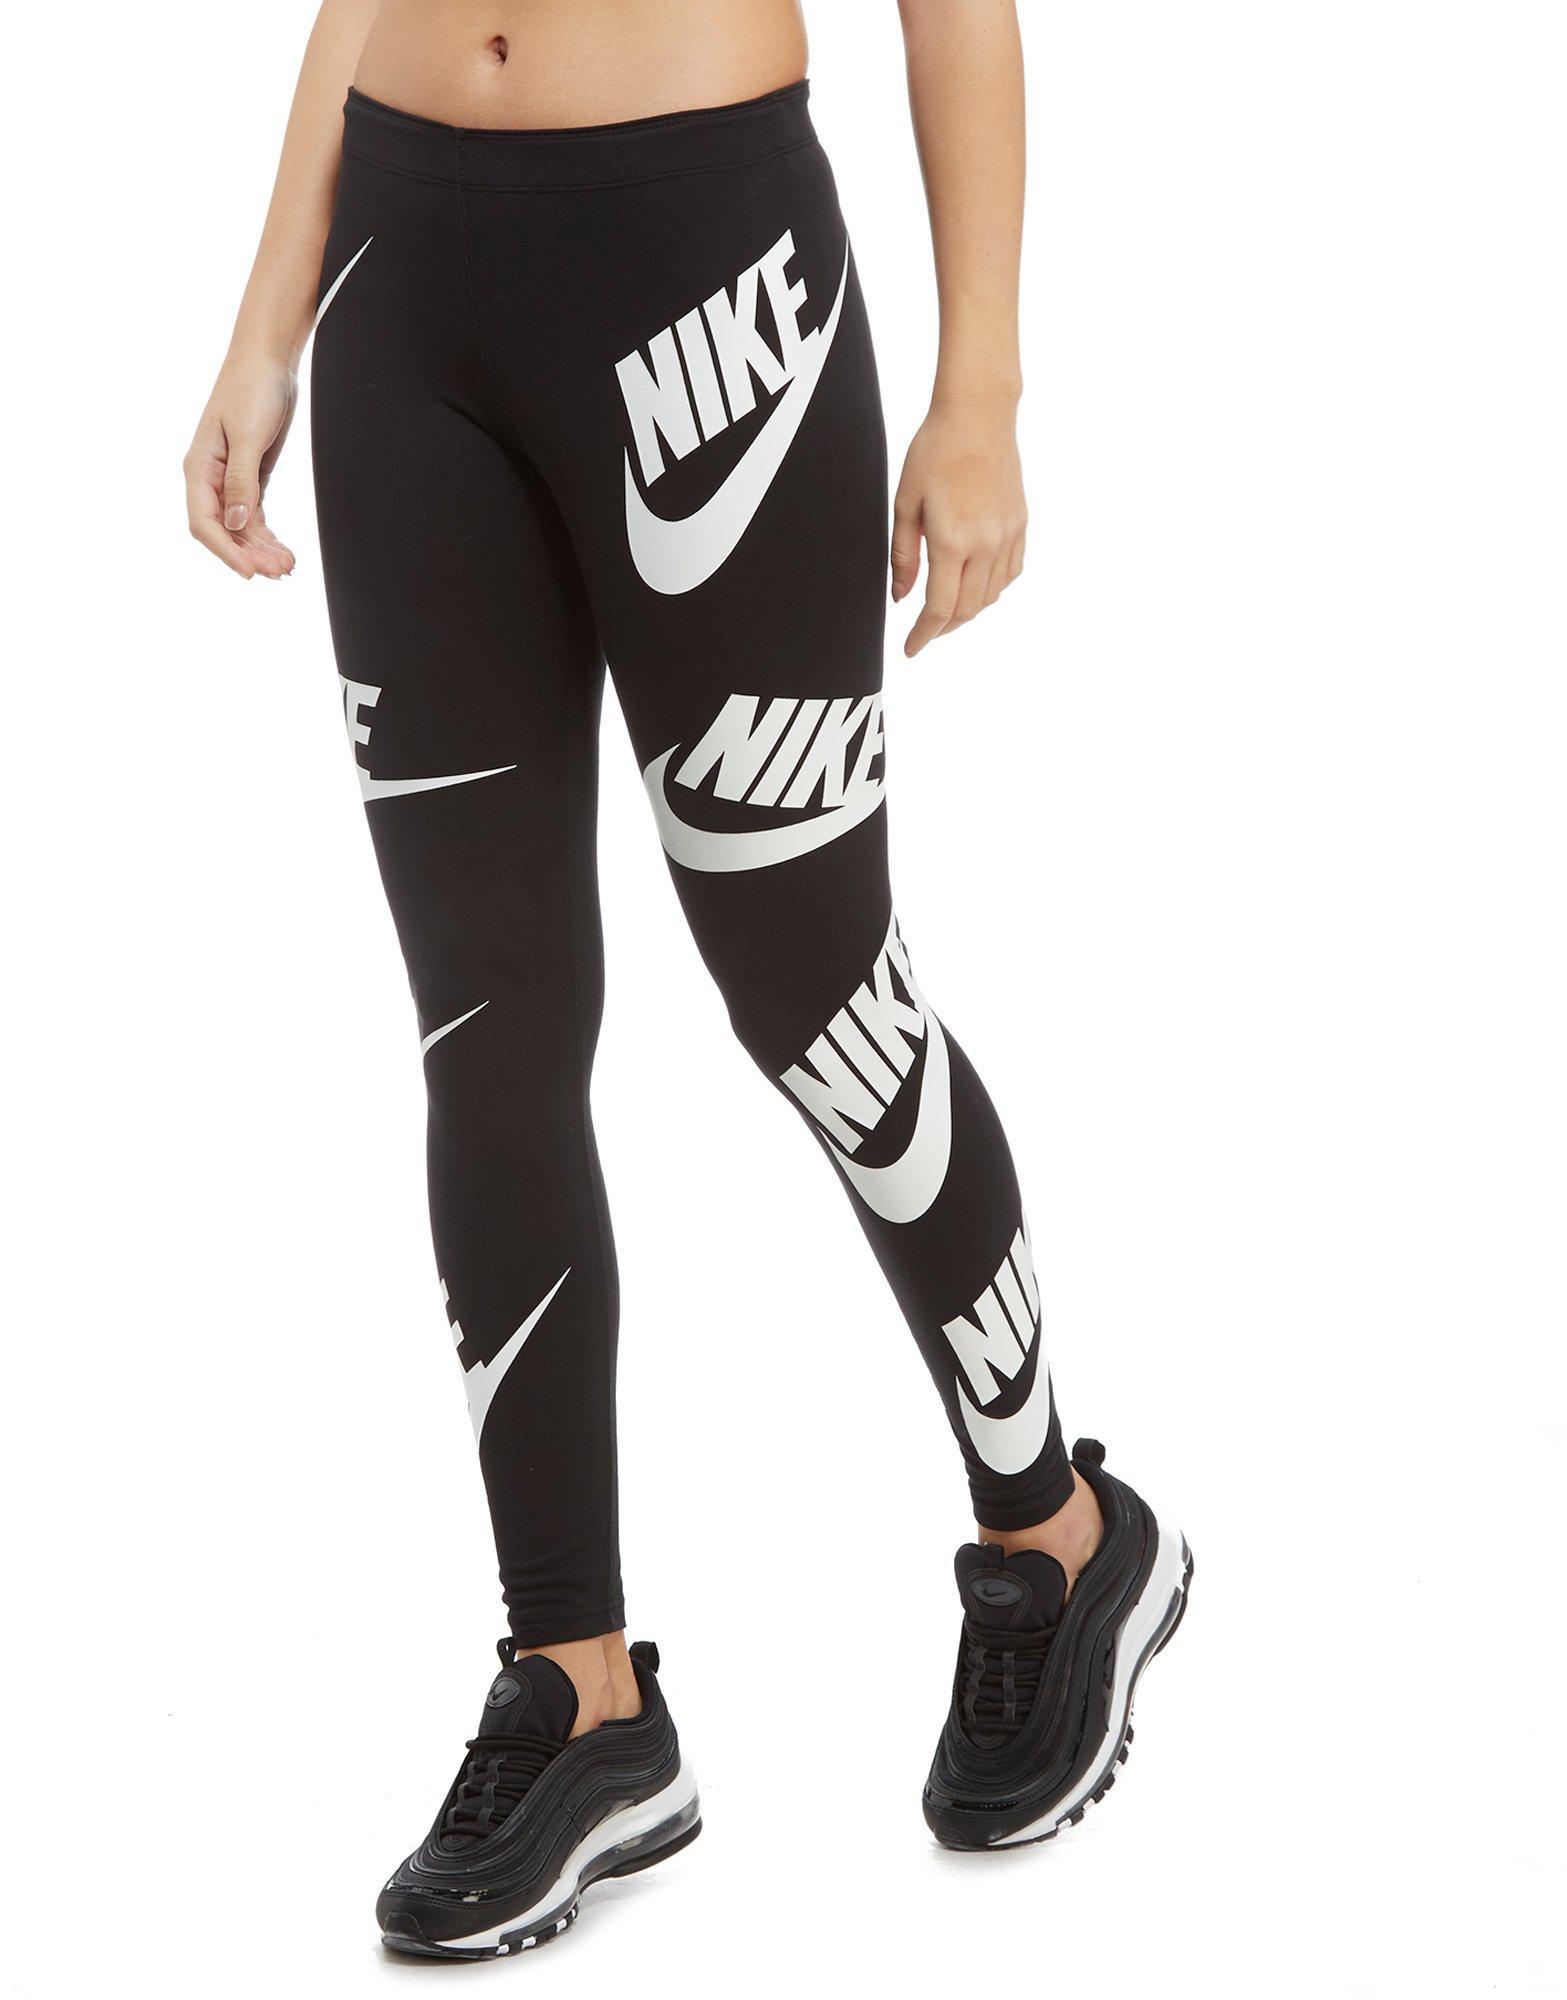 Nike Tights With Nike Logo All Over on Sale, SAVE 33% - mpgc.net